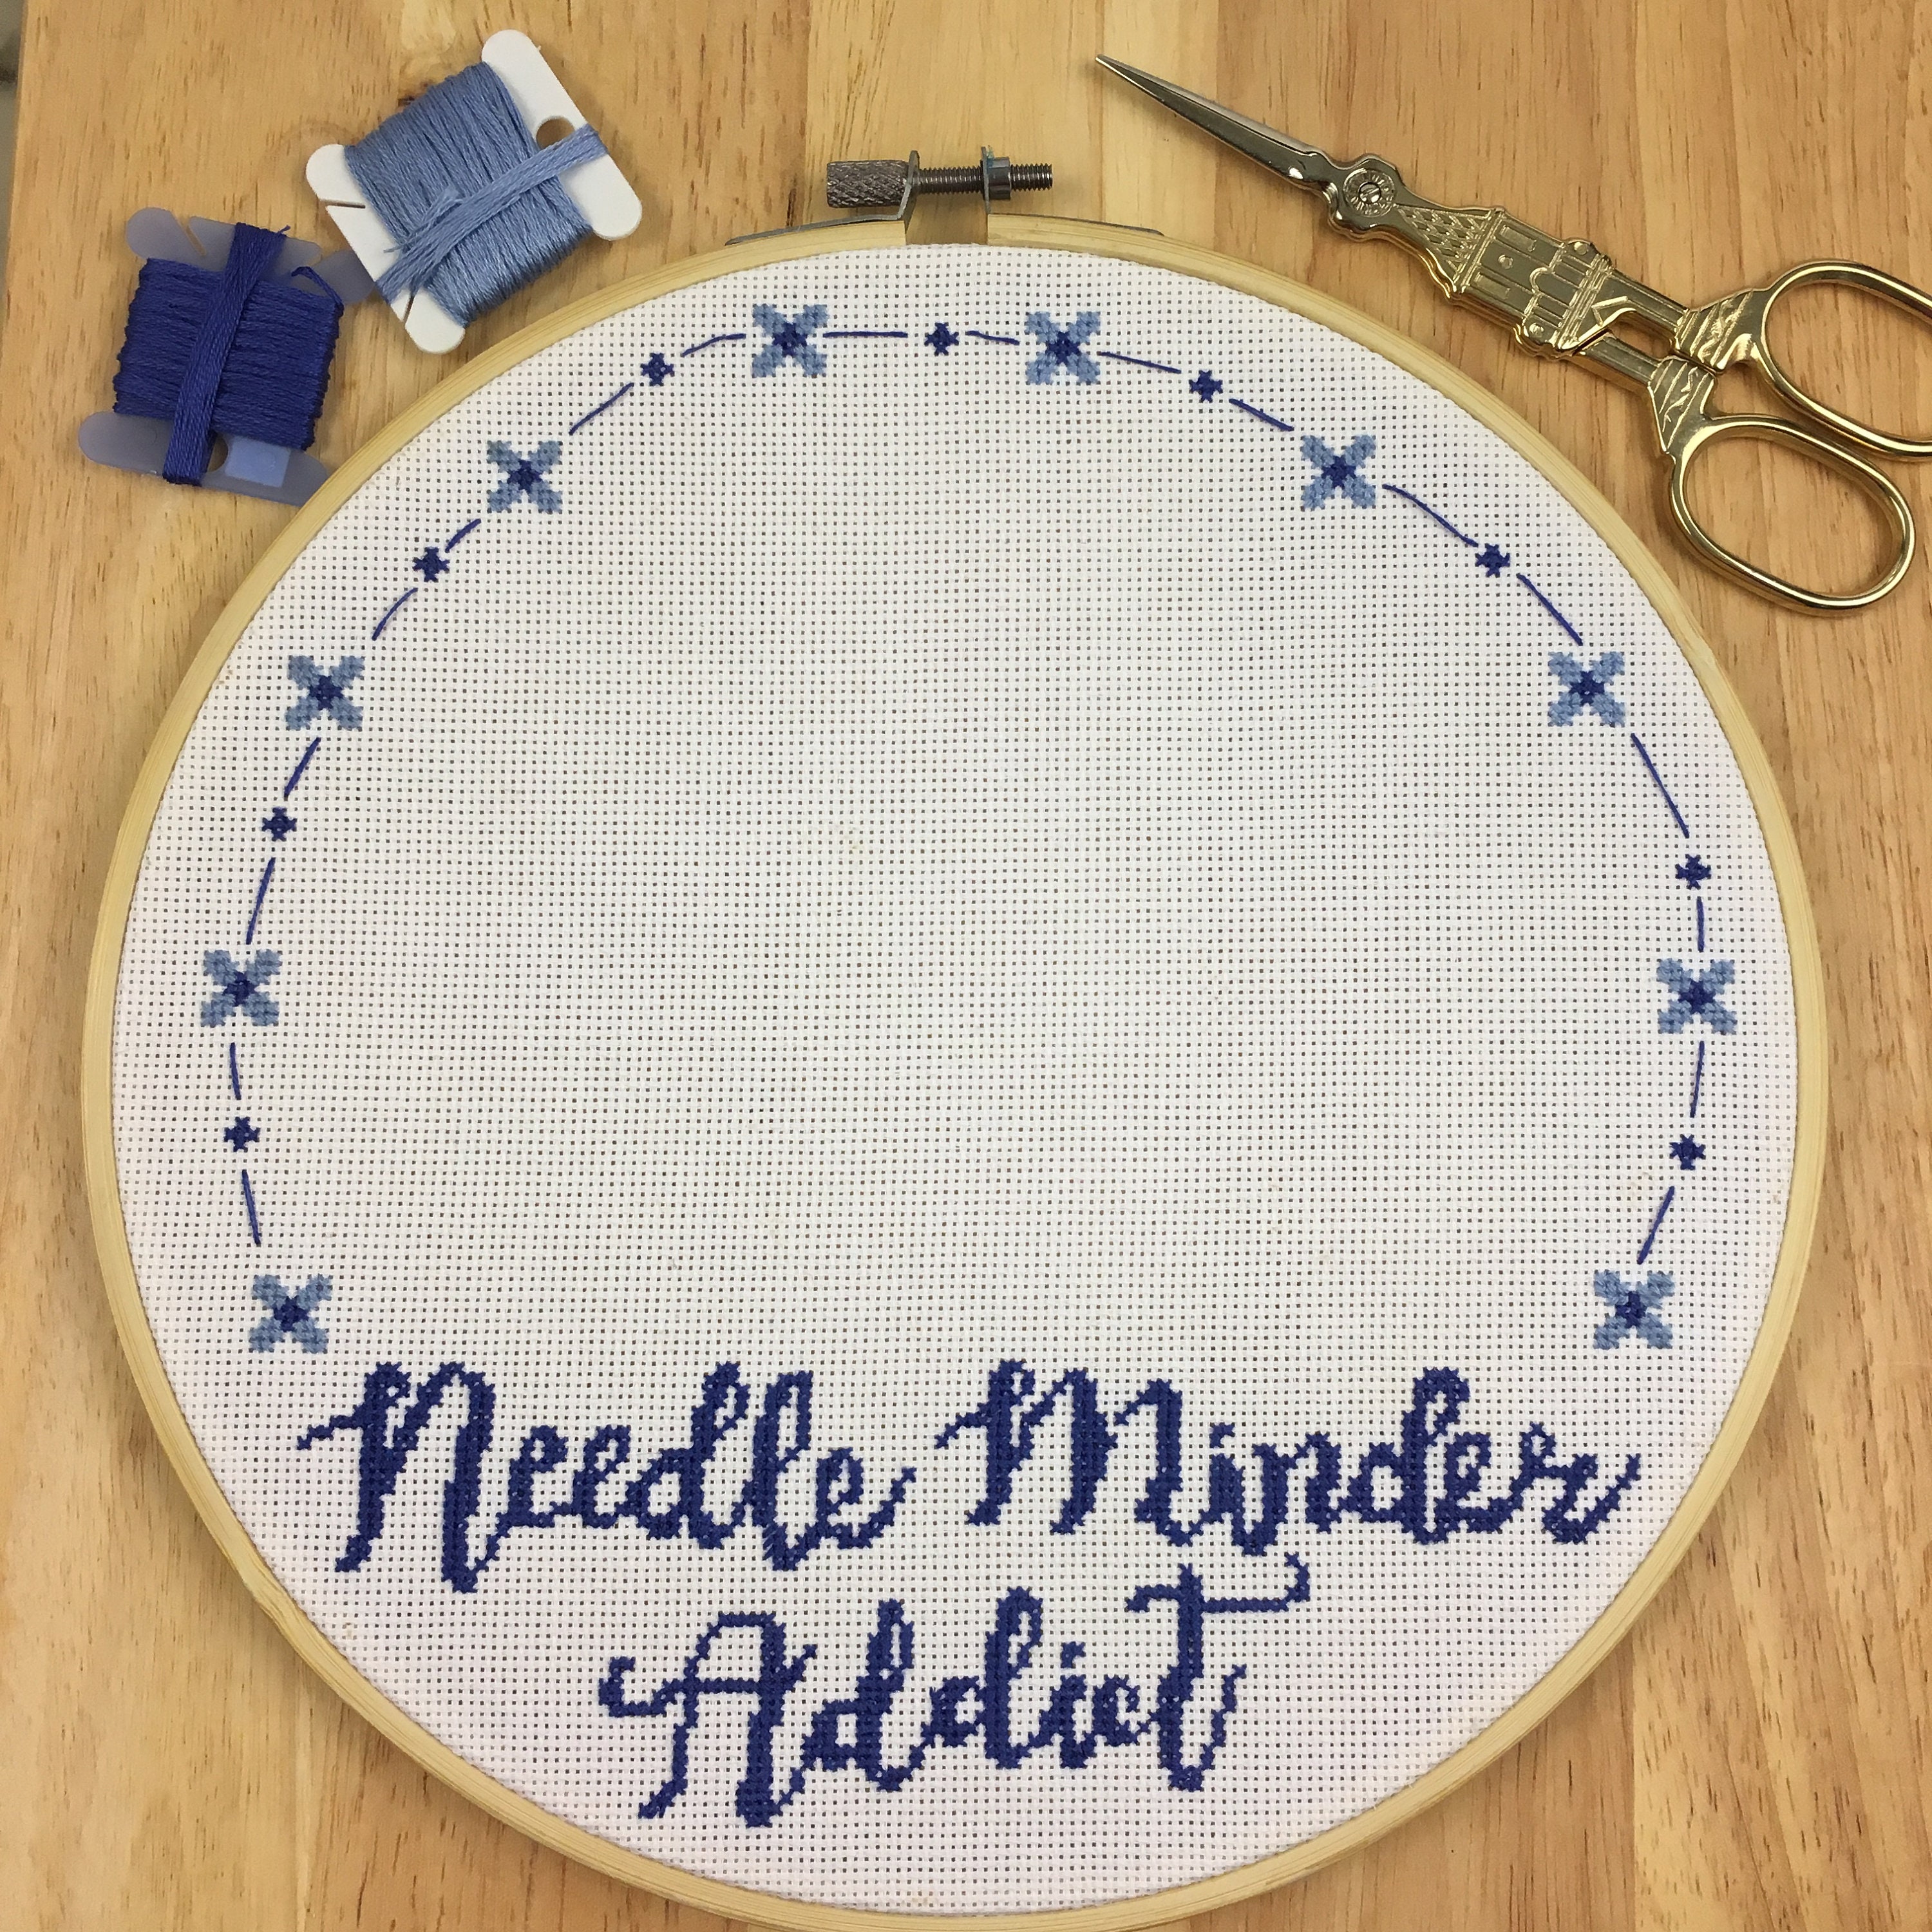 PIC] Making my own needle minders : r/CrossStitch